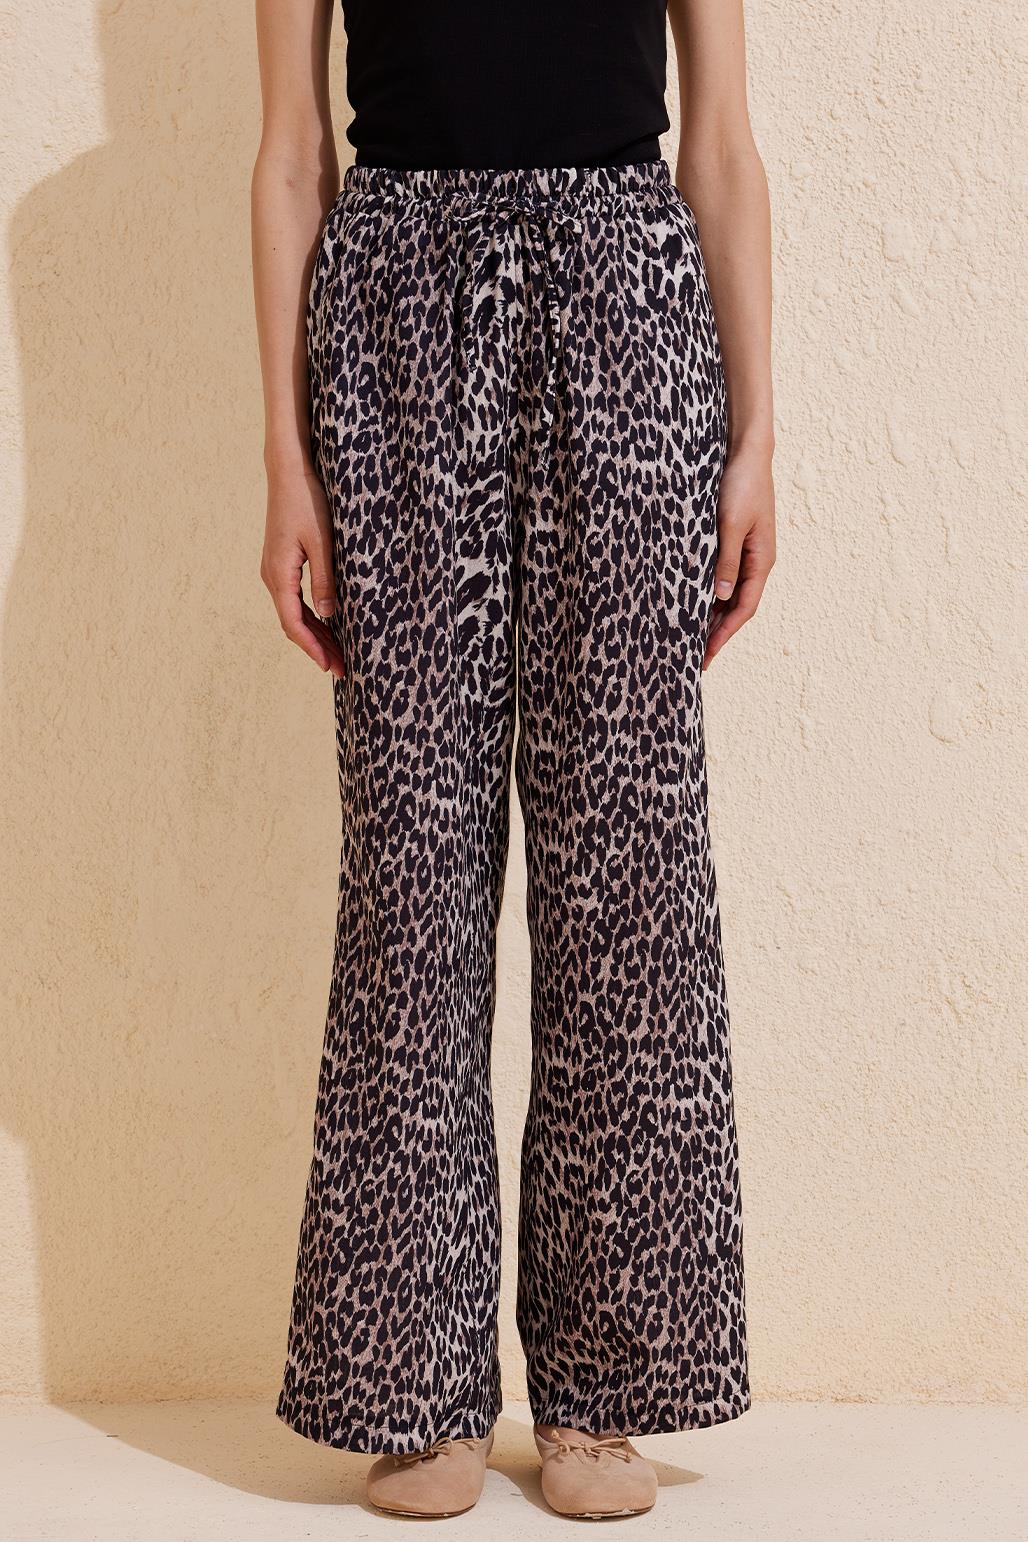 Leopard Patterned Summer Loose Trousers Brown